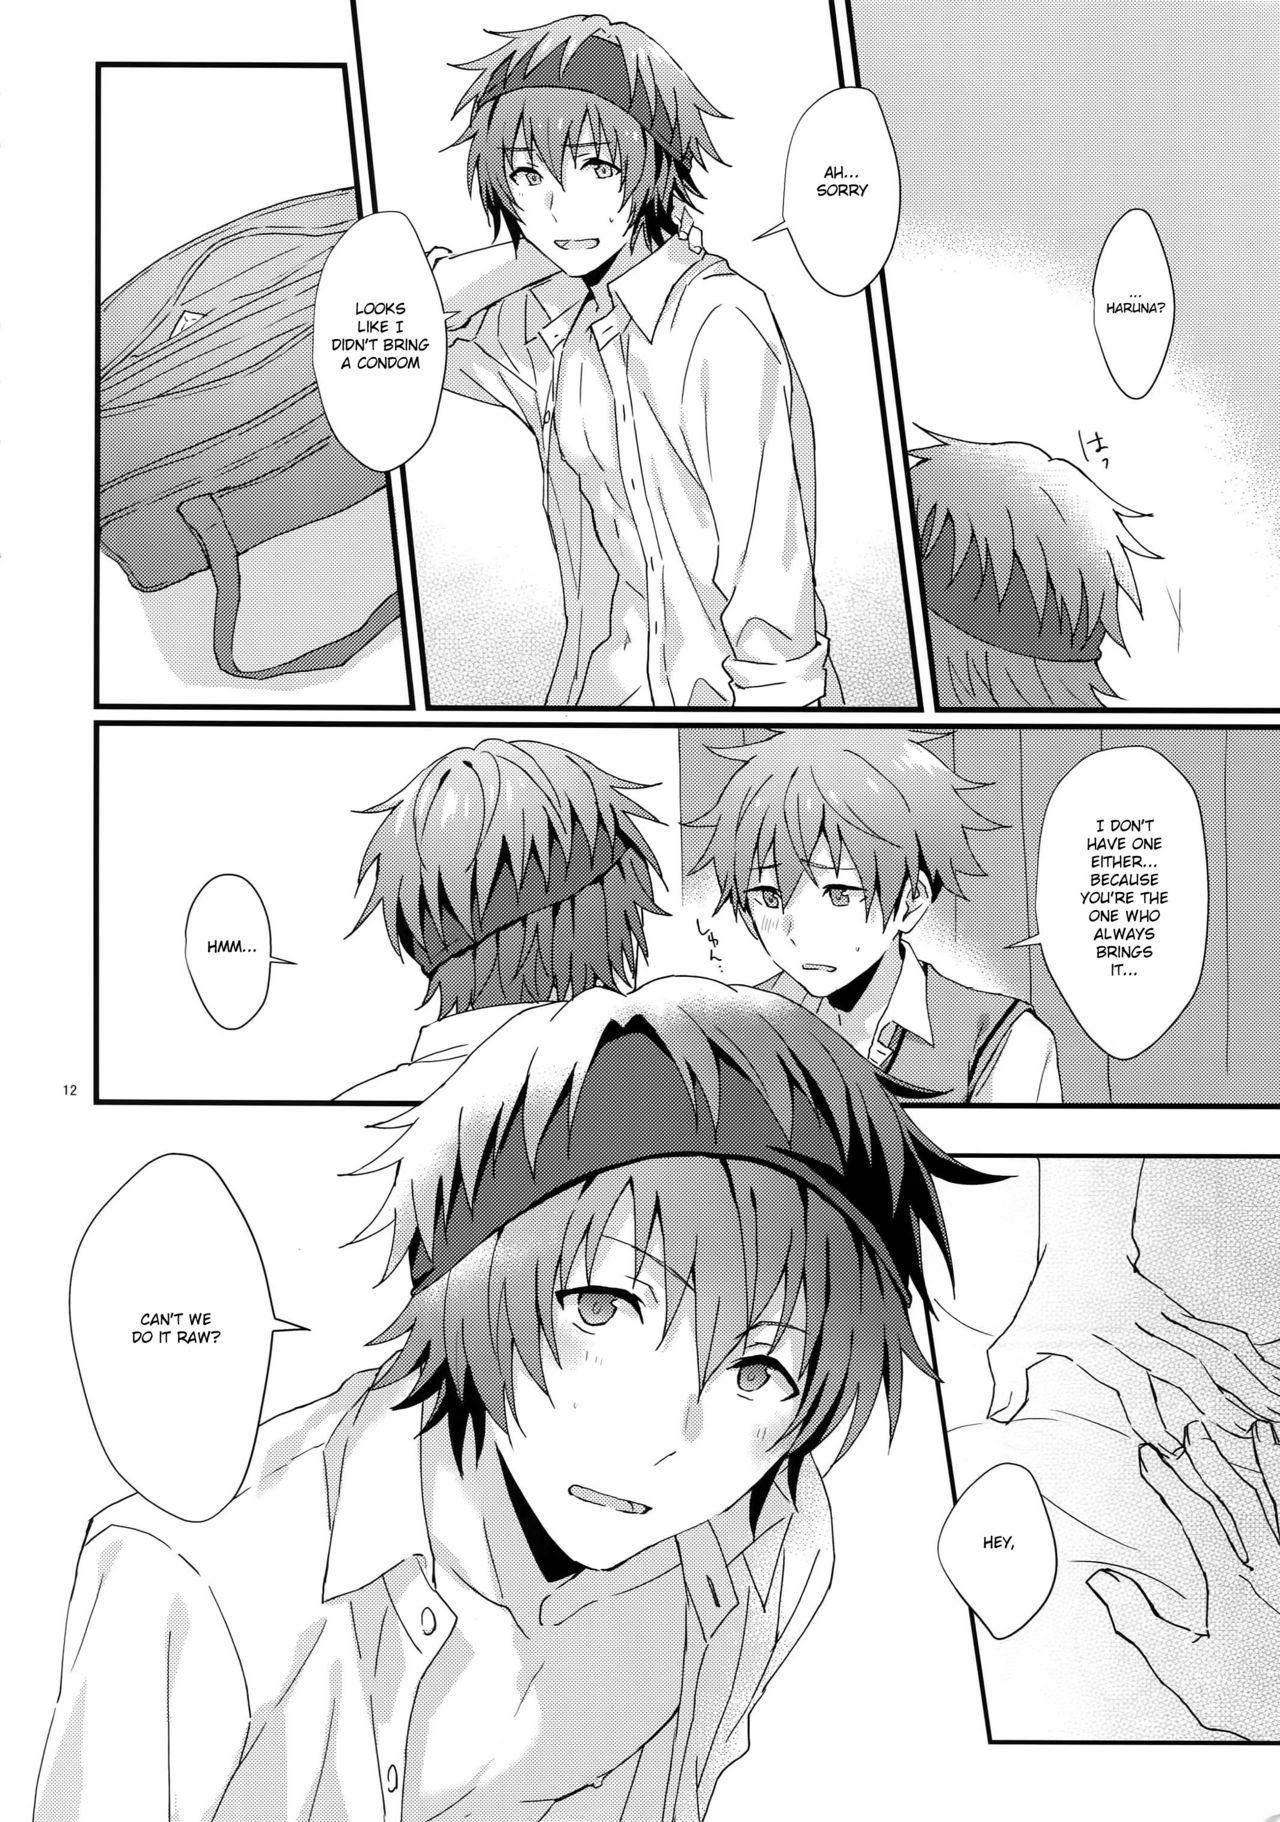 Groping Which One's Better? - The idolmaster Teenie - Page 11